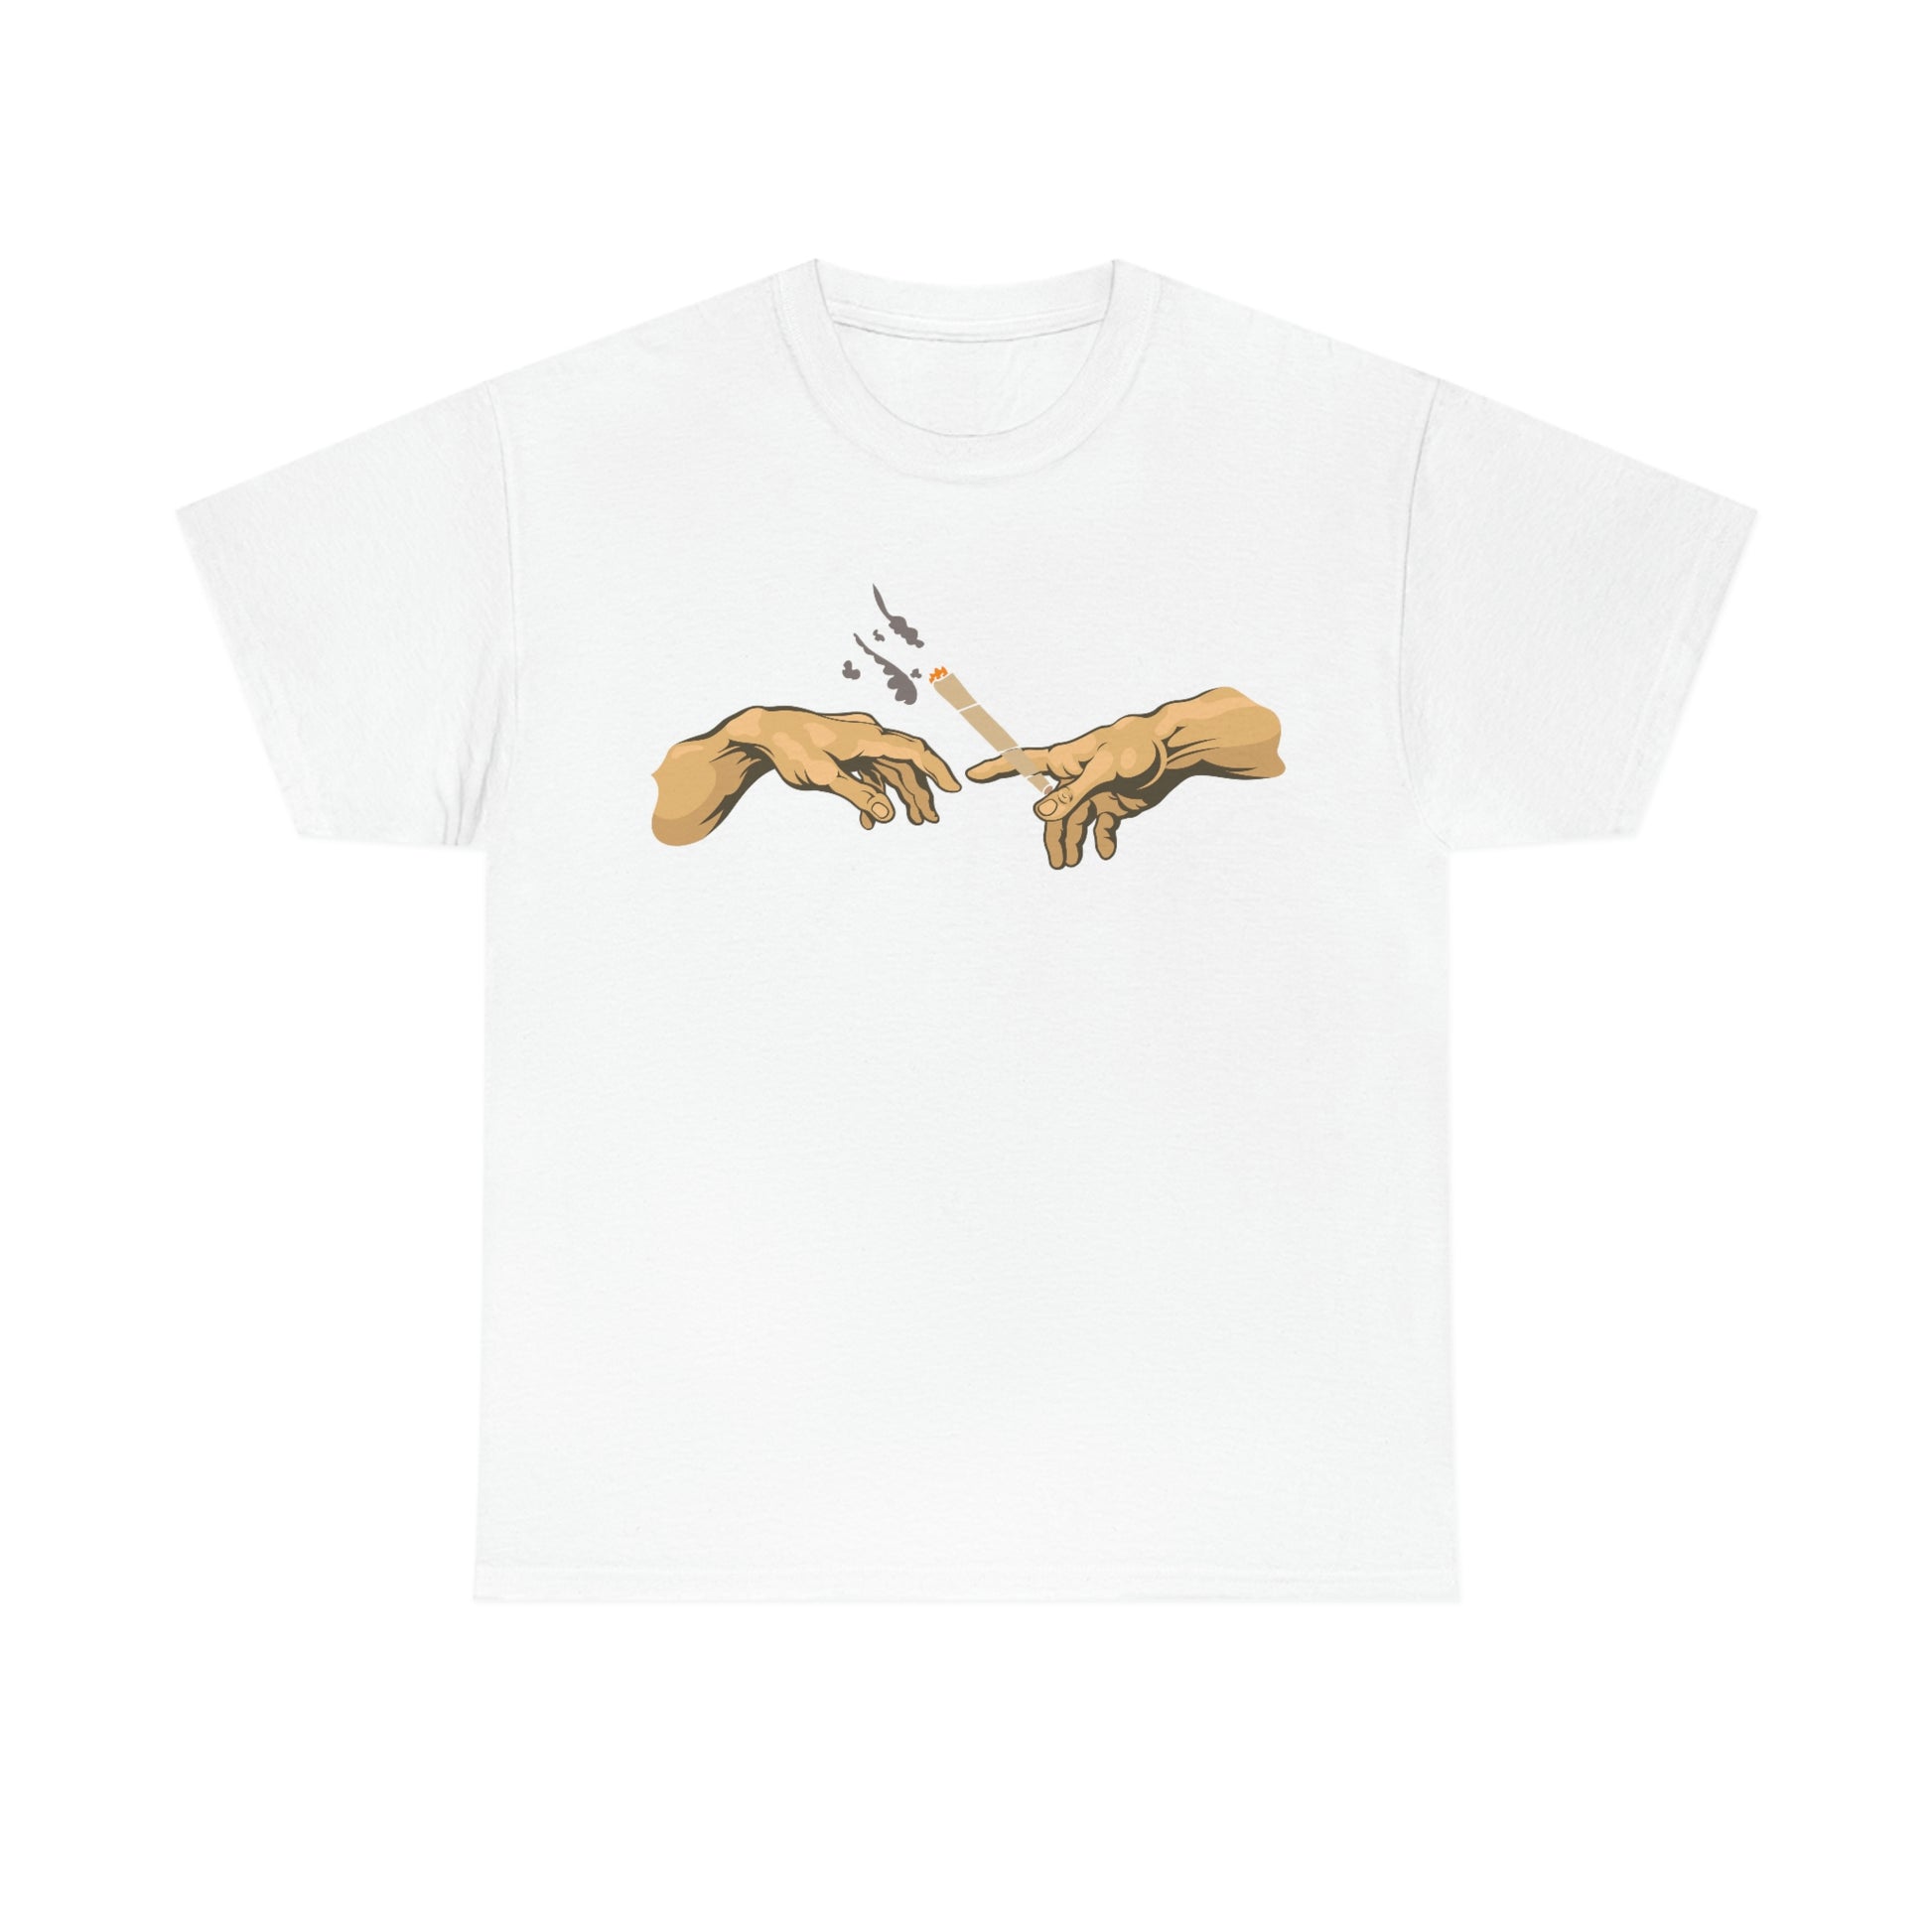 The Michelangelo Smoking Joint Tee.